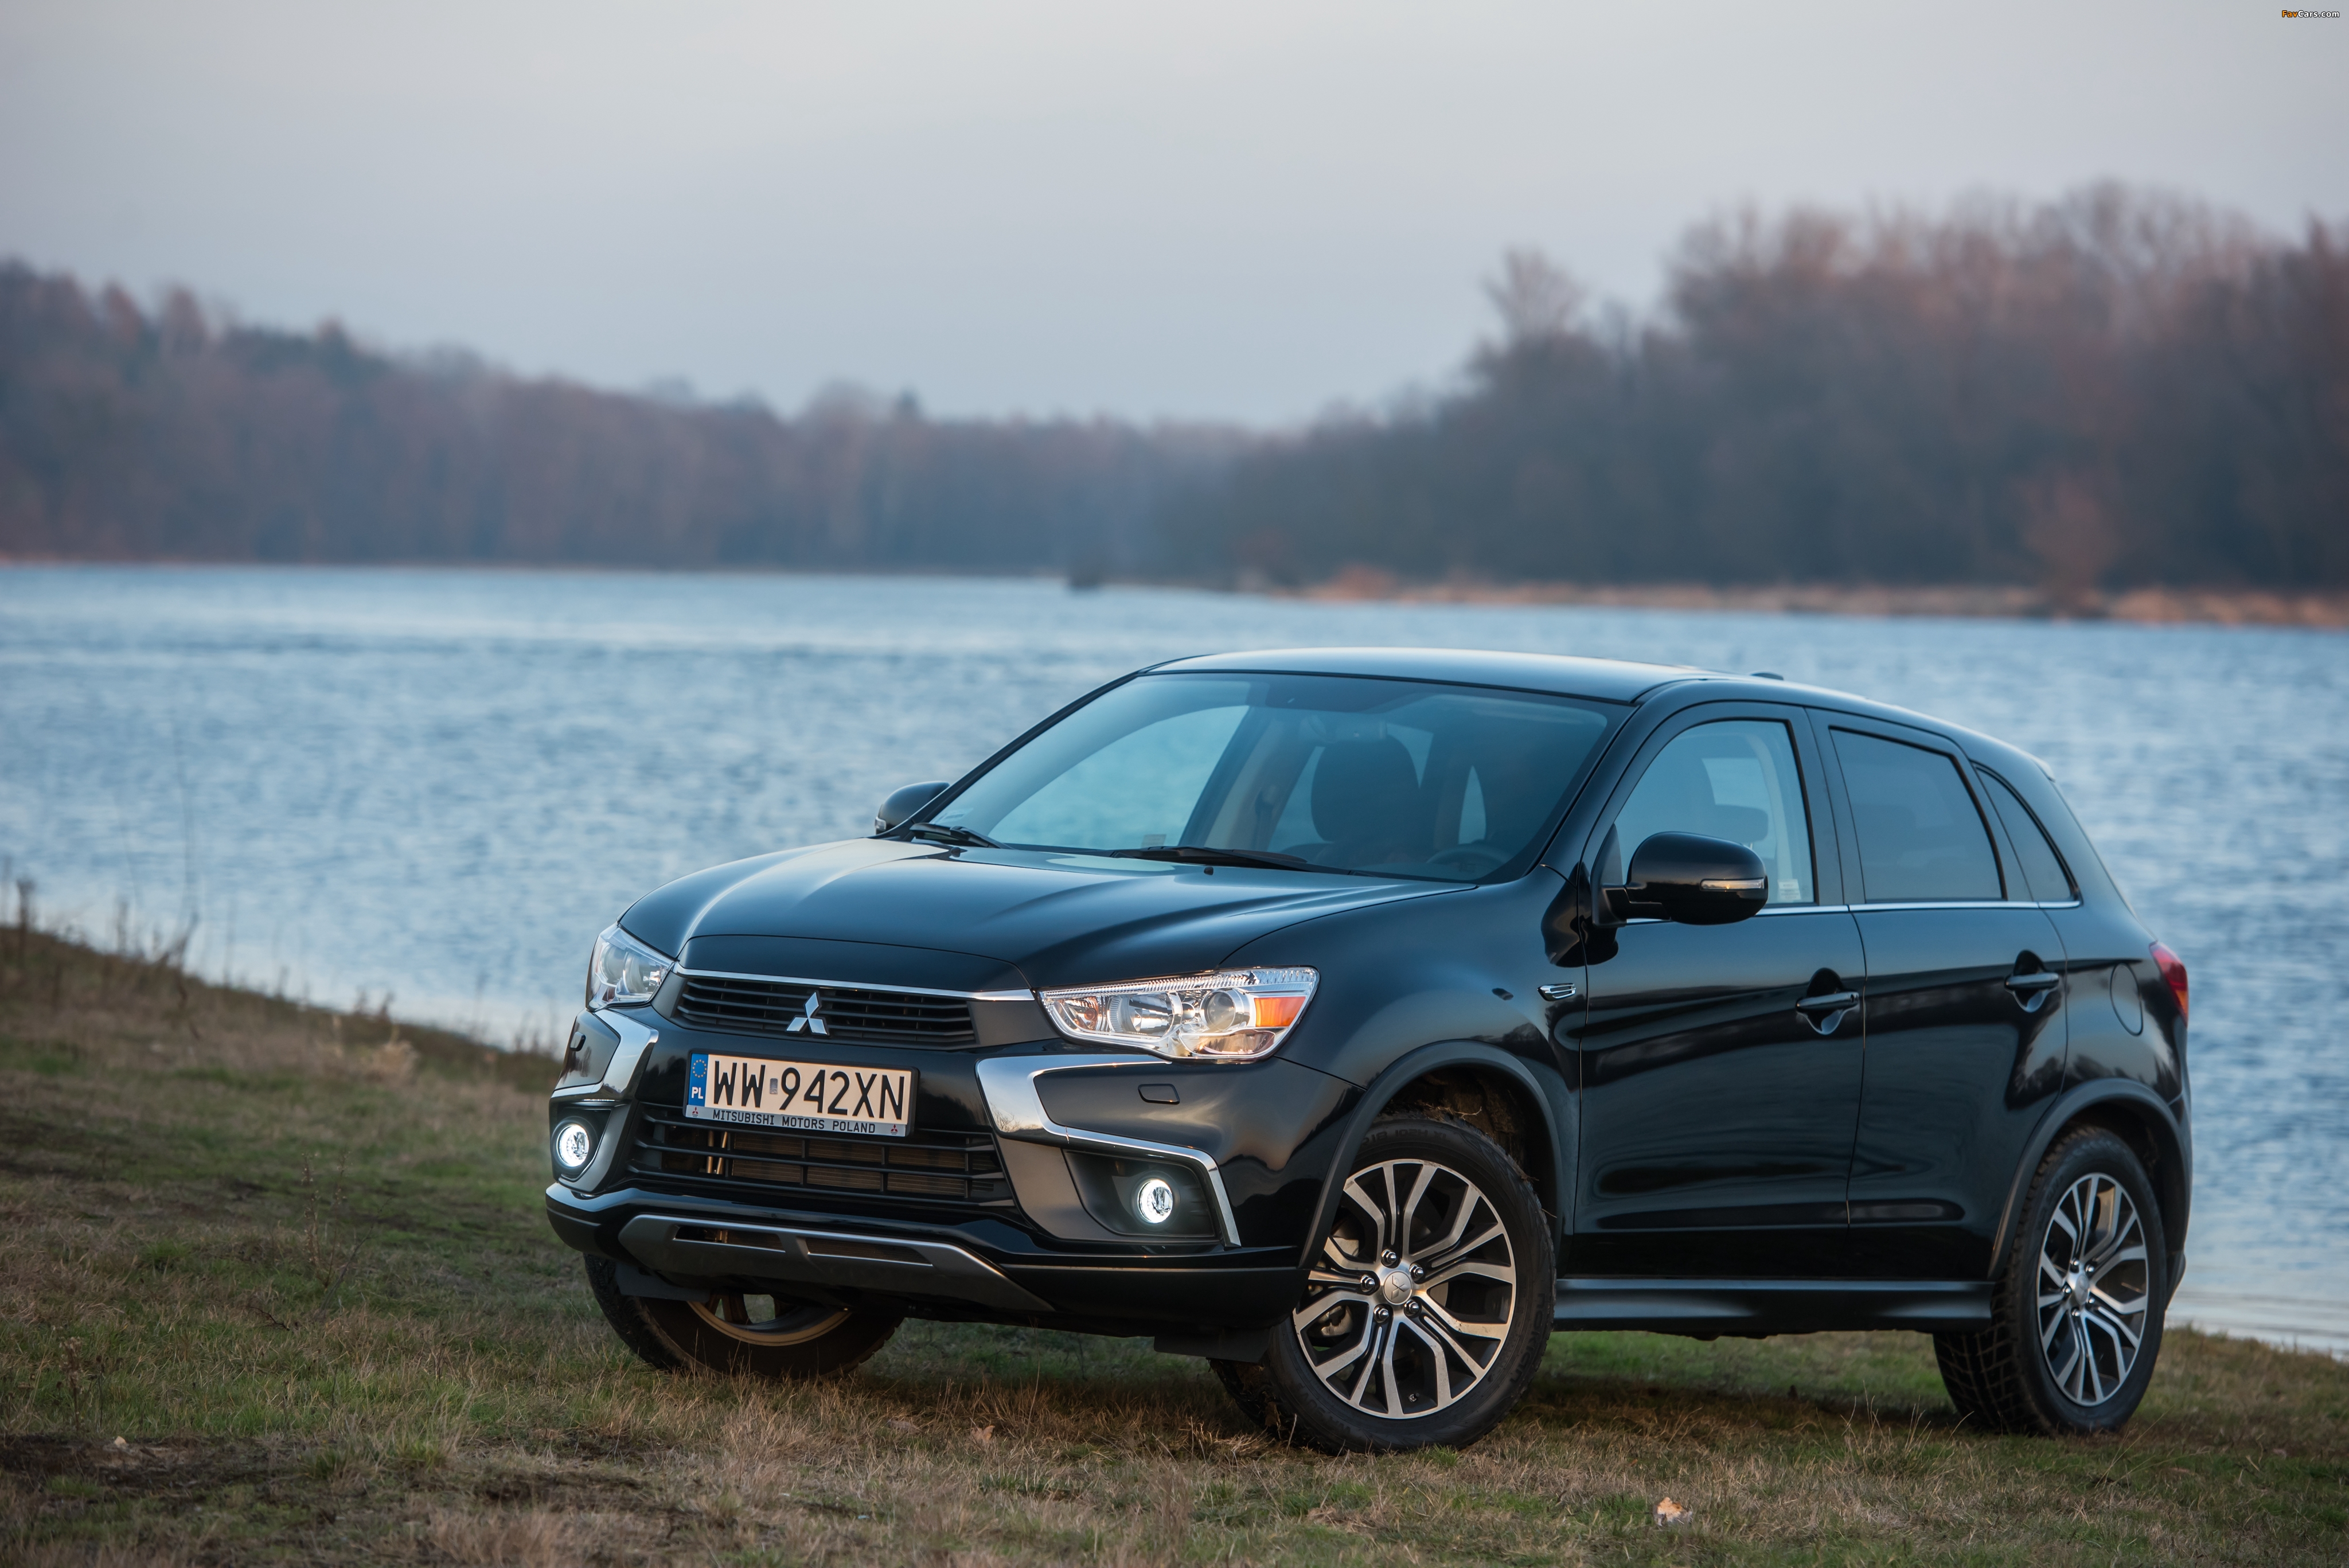 Pictures of Mitsubishi ASX 2016 (4096x2734)